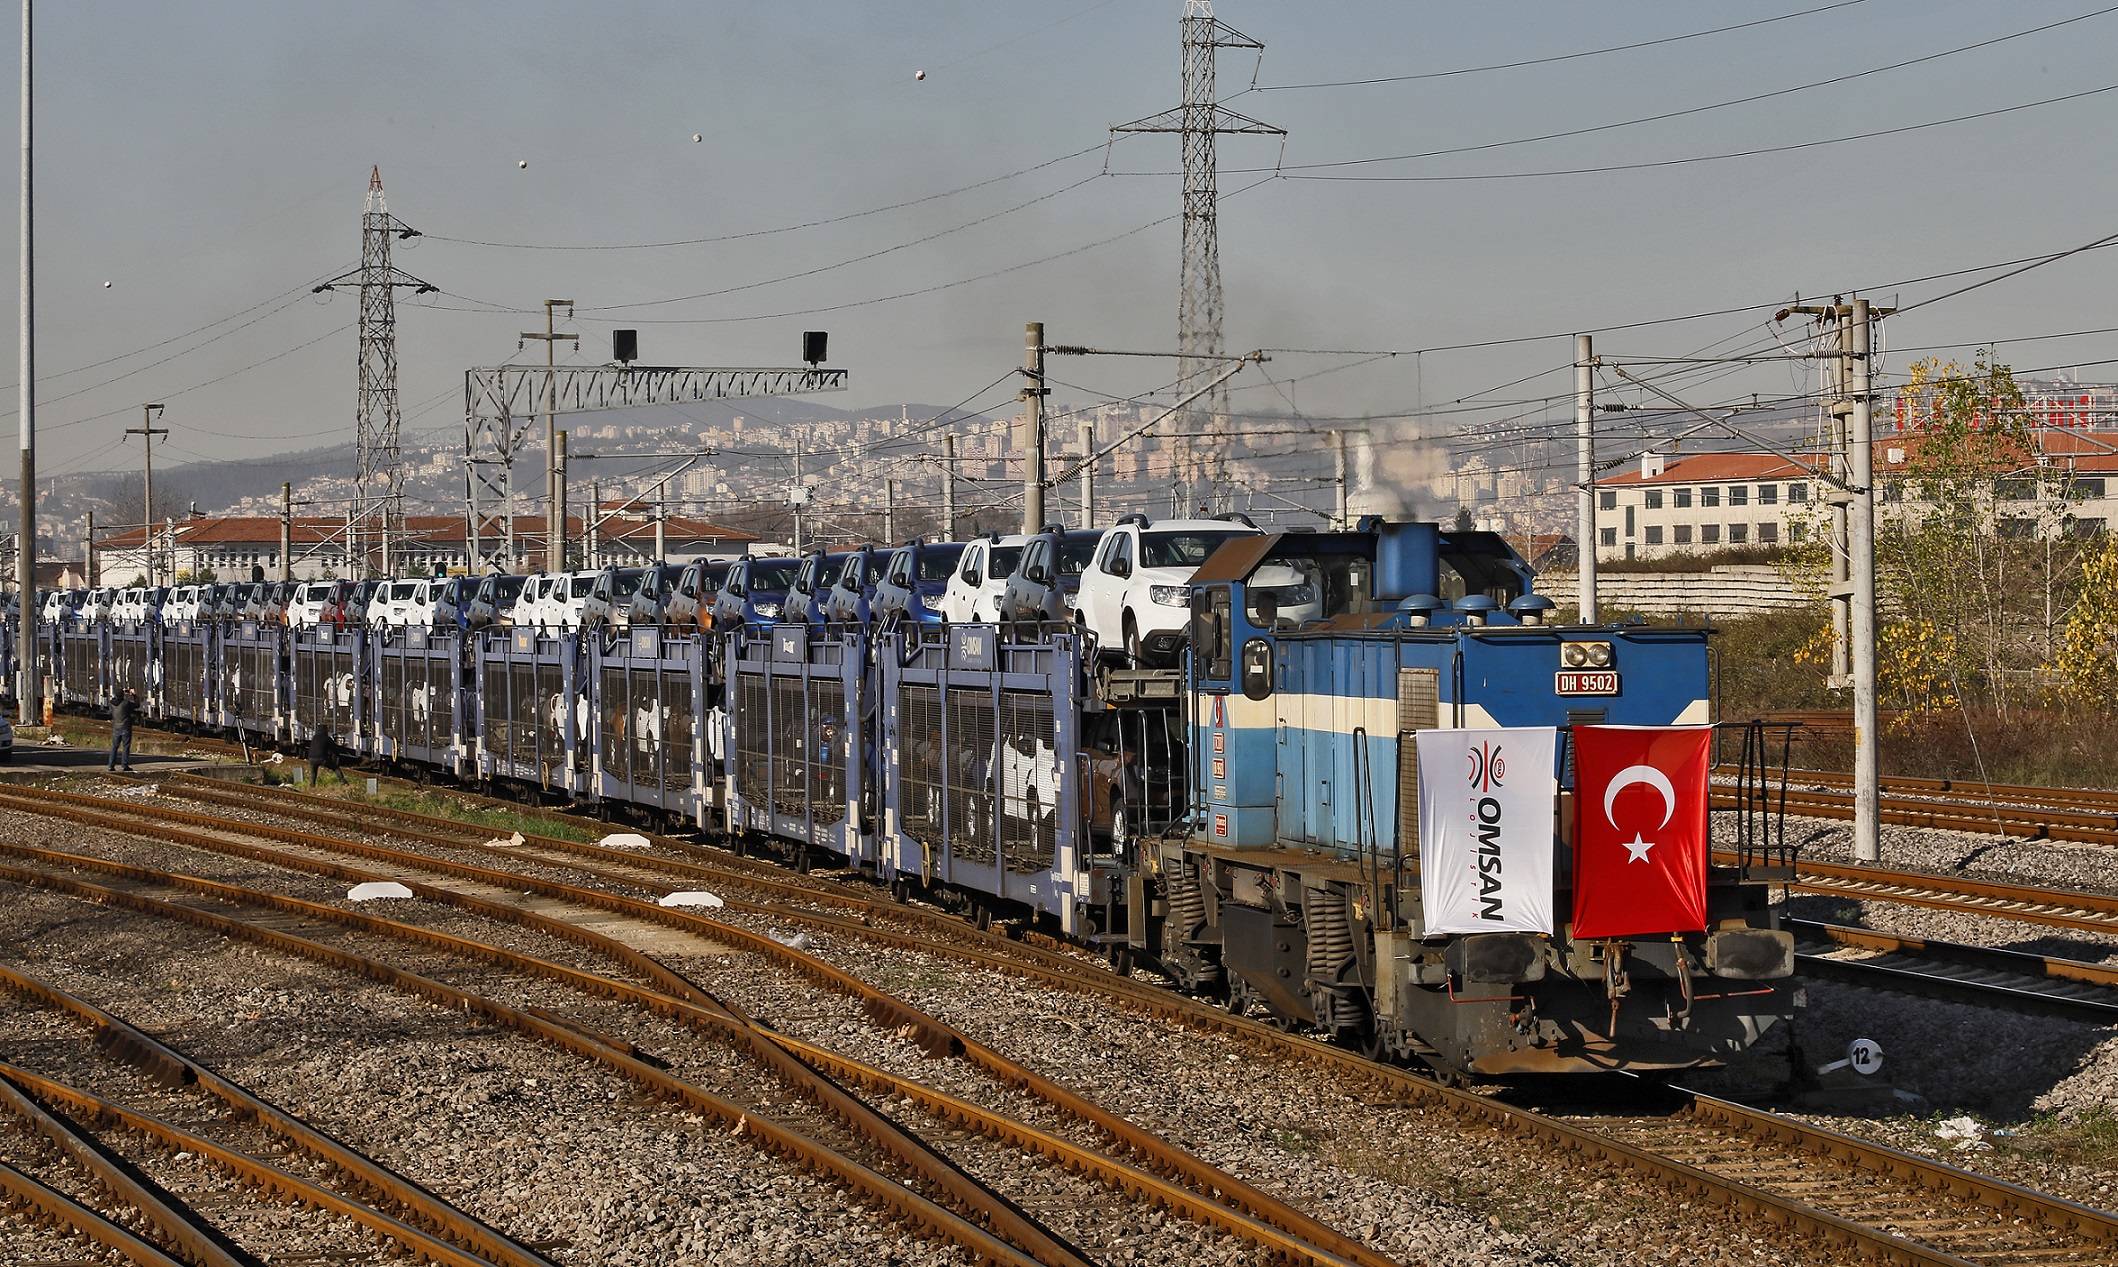 Omsan Logistics broke new ground in the world by transporting automobiles under the sea with Marmaray.